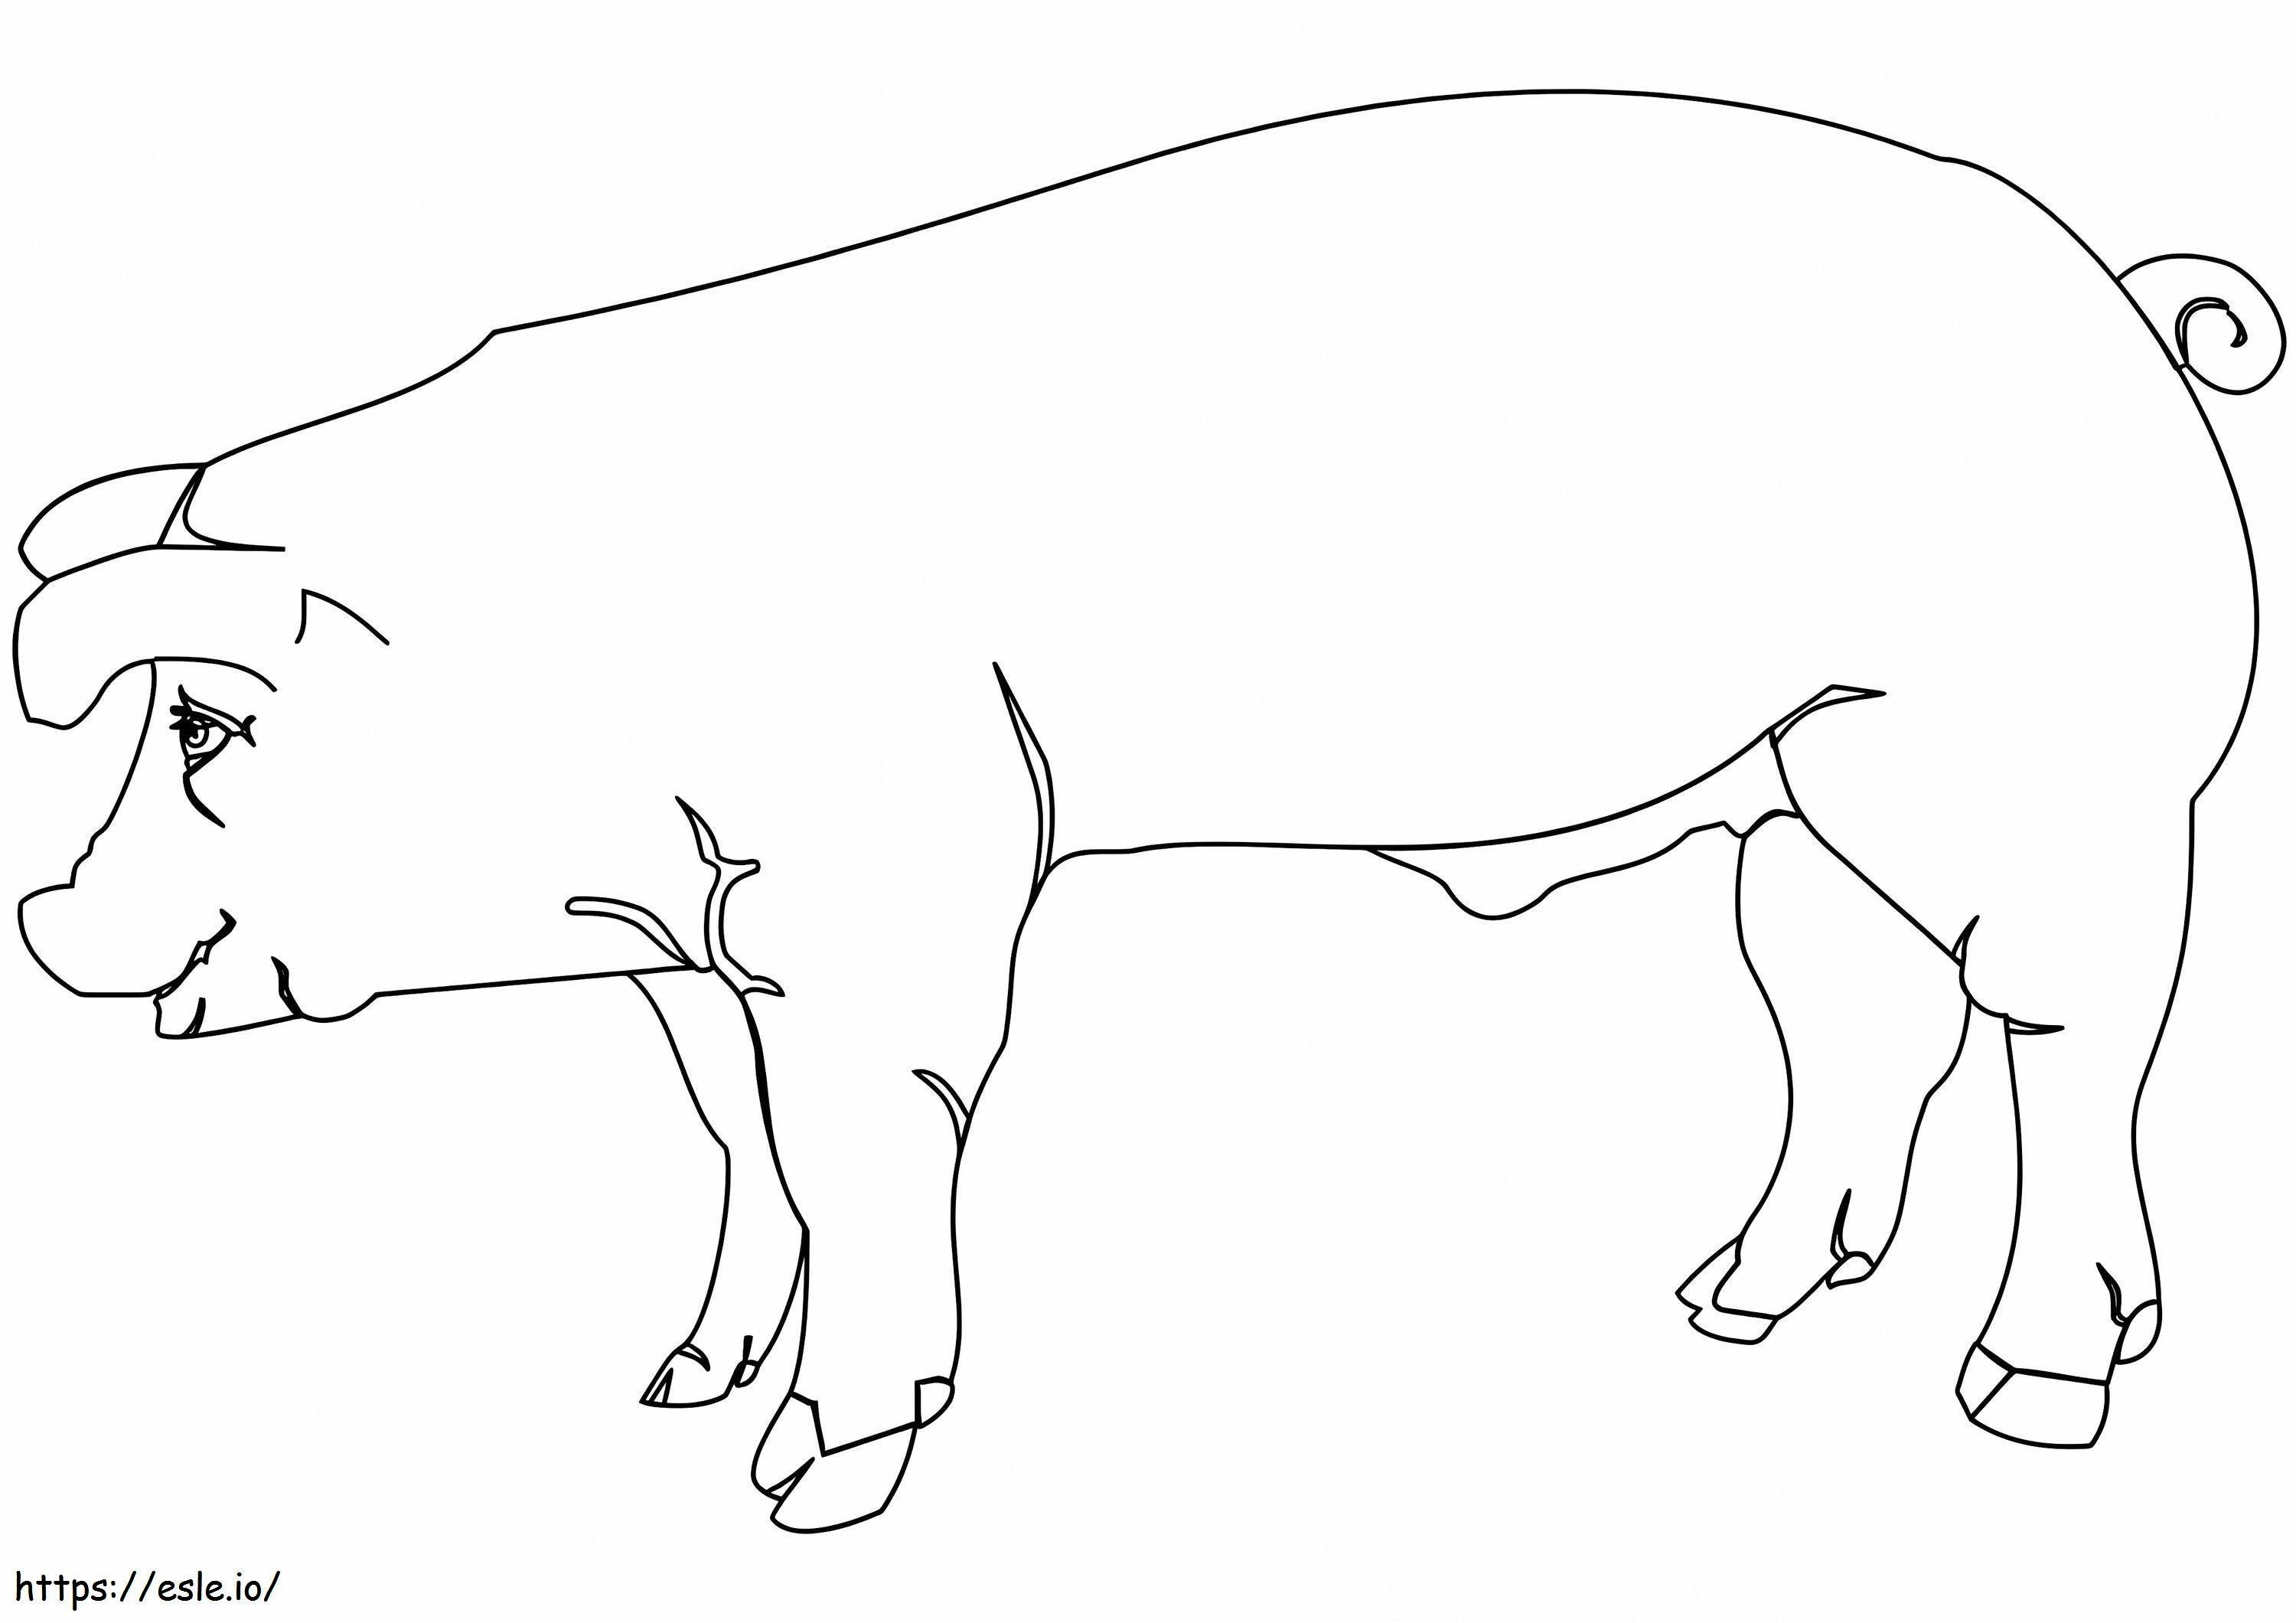 Normal Pig 2 coloring page